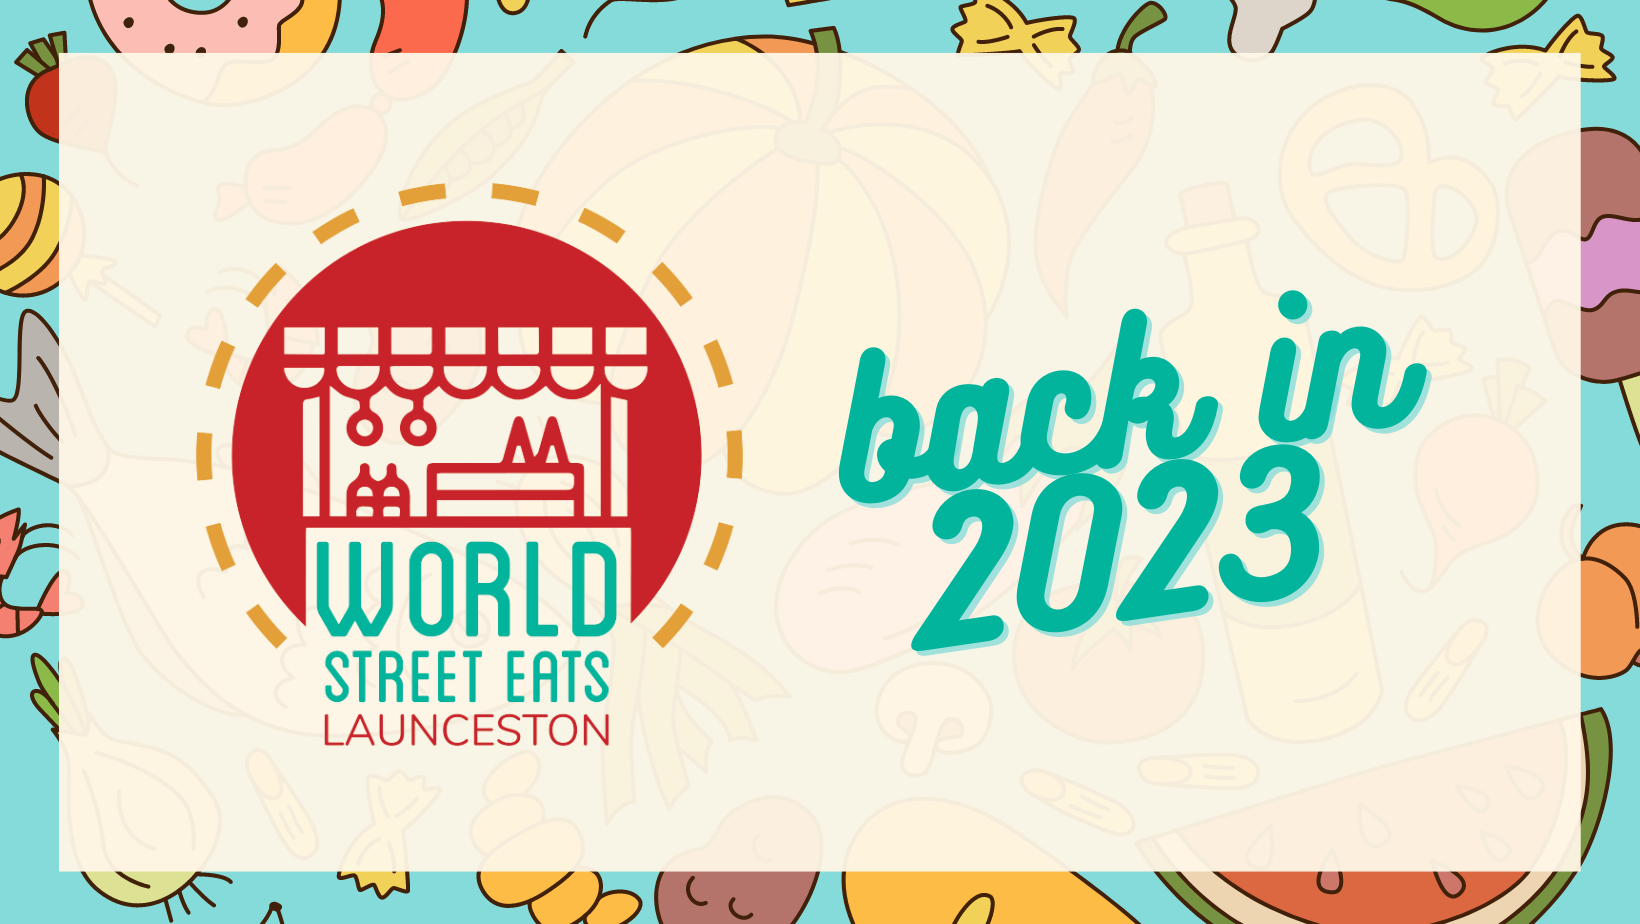 World Street Eats Back in 2023 Poster, colourful with illustrations of food